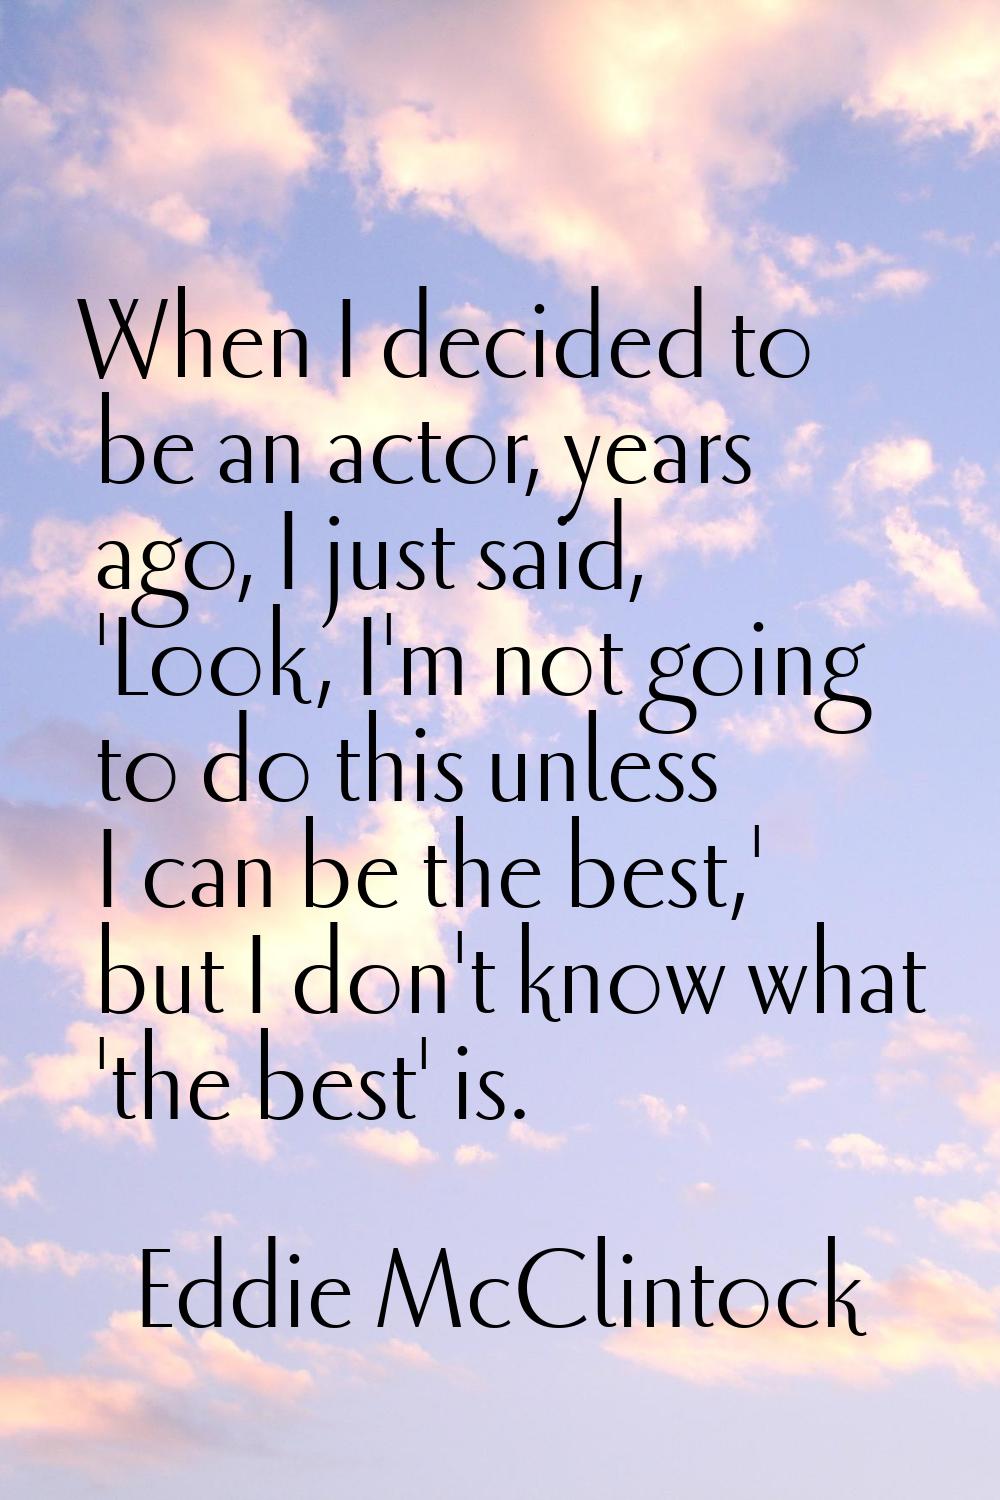 When I decided to be an actor, years ago, I just said, 'Look, I'm not going to do this unless I can